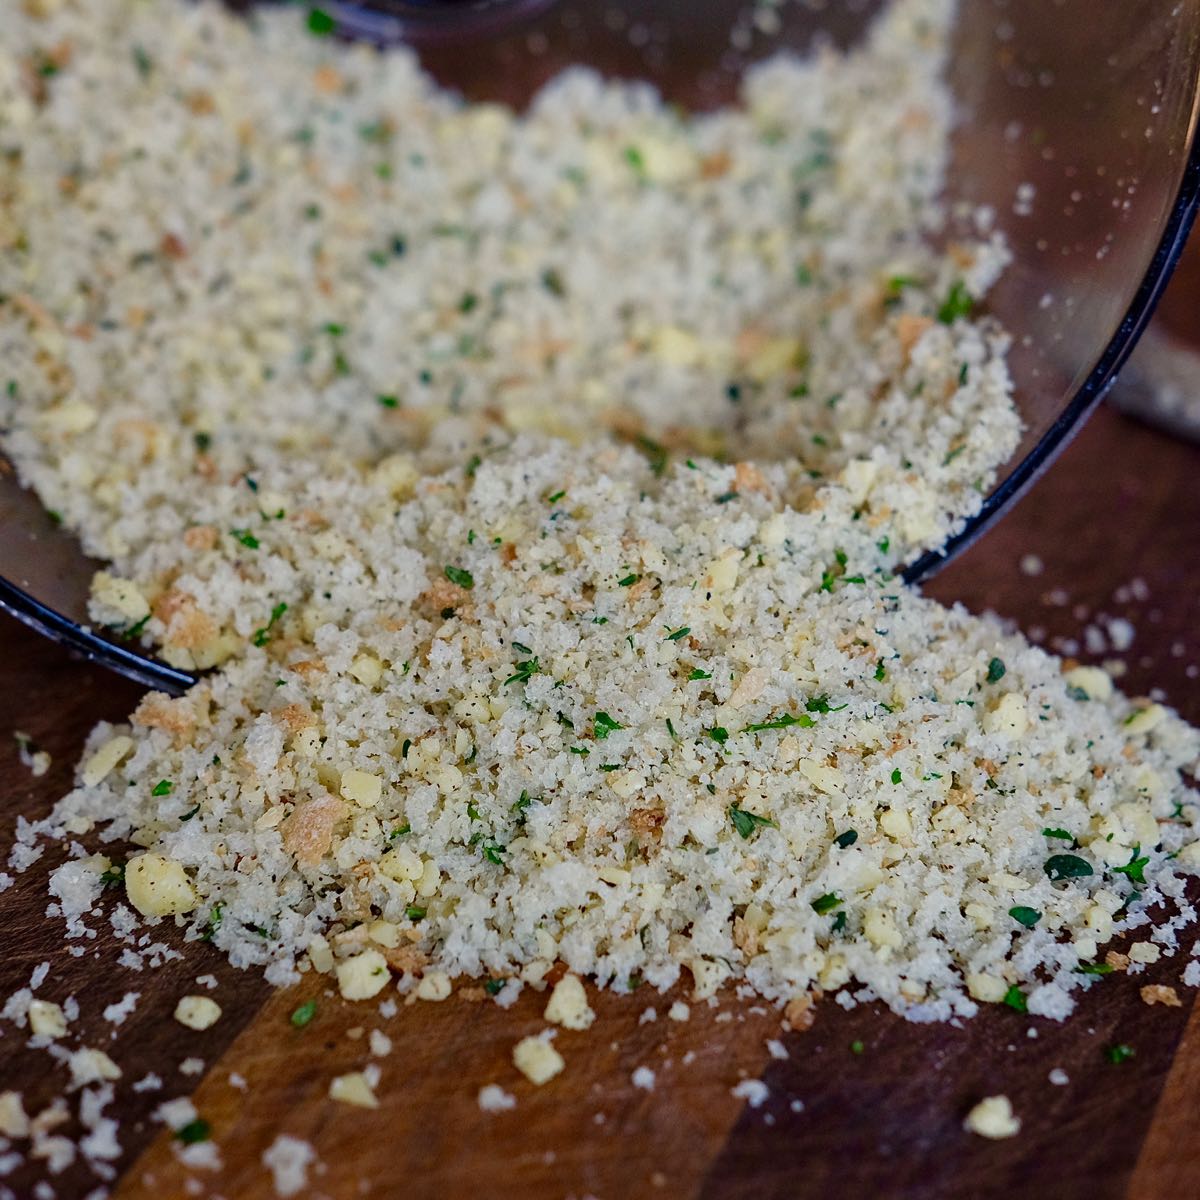 Fresh Breadcrumbs with Gouda Cheese and Herbs